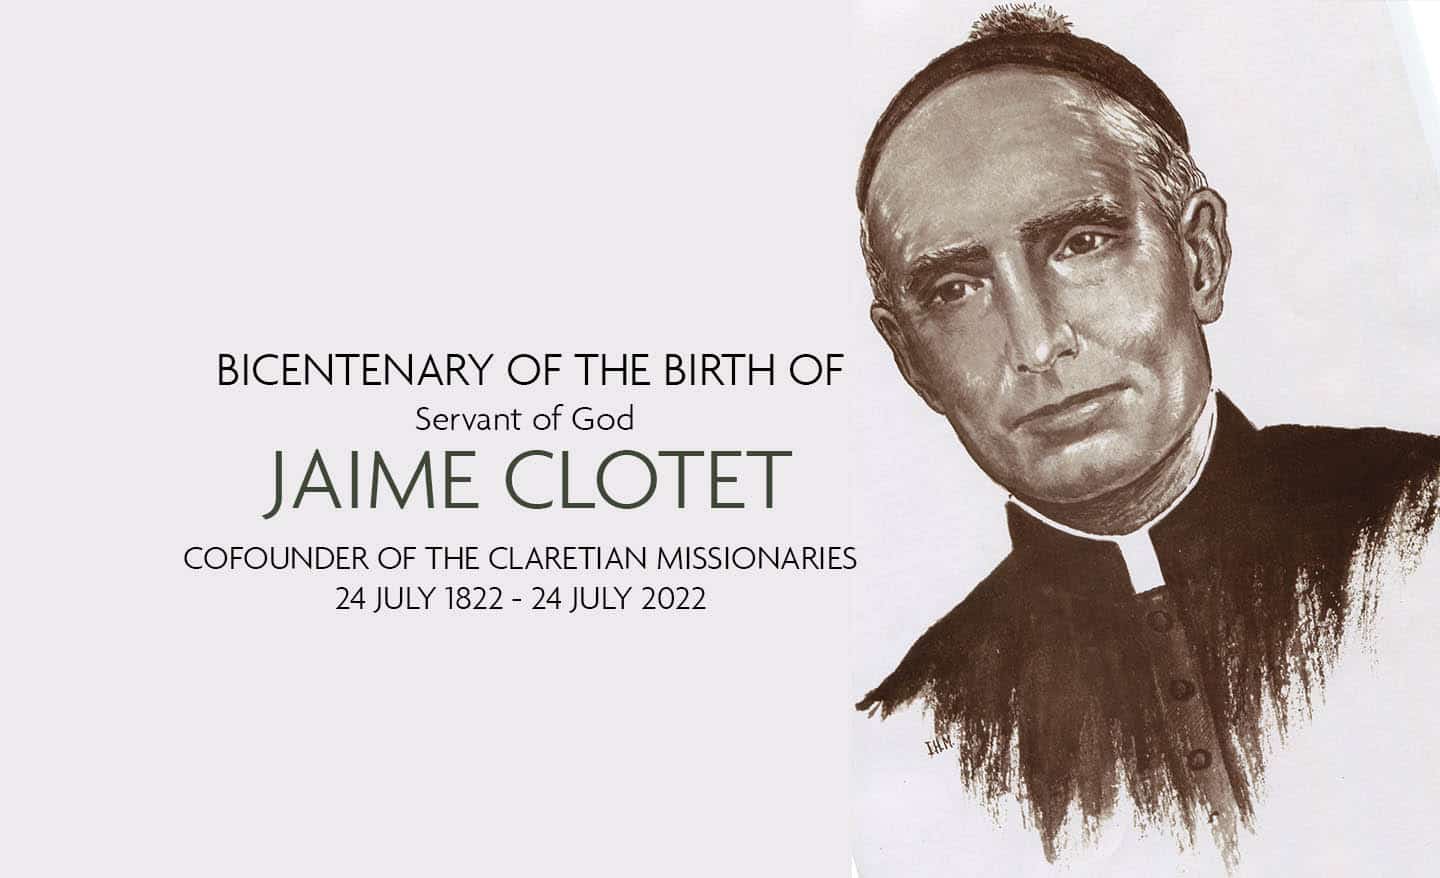 Message of Father General on the Bicentenary of the Birth of Fr. Jaime Clotet, C.M.F.